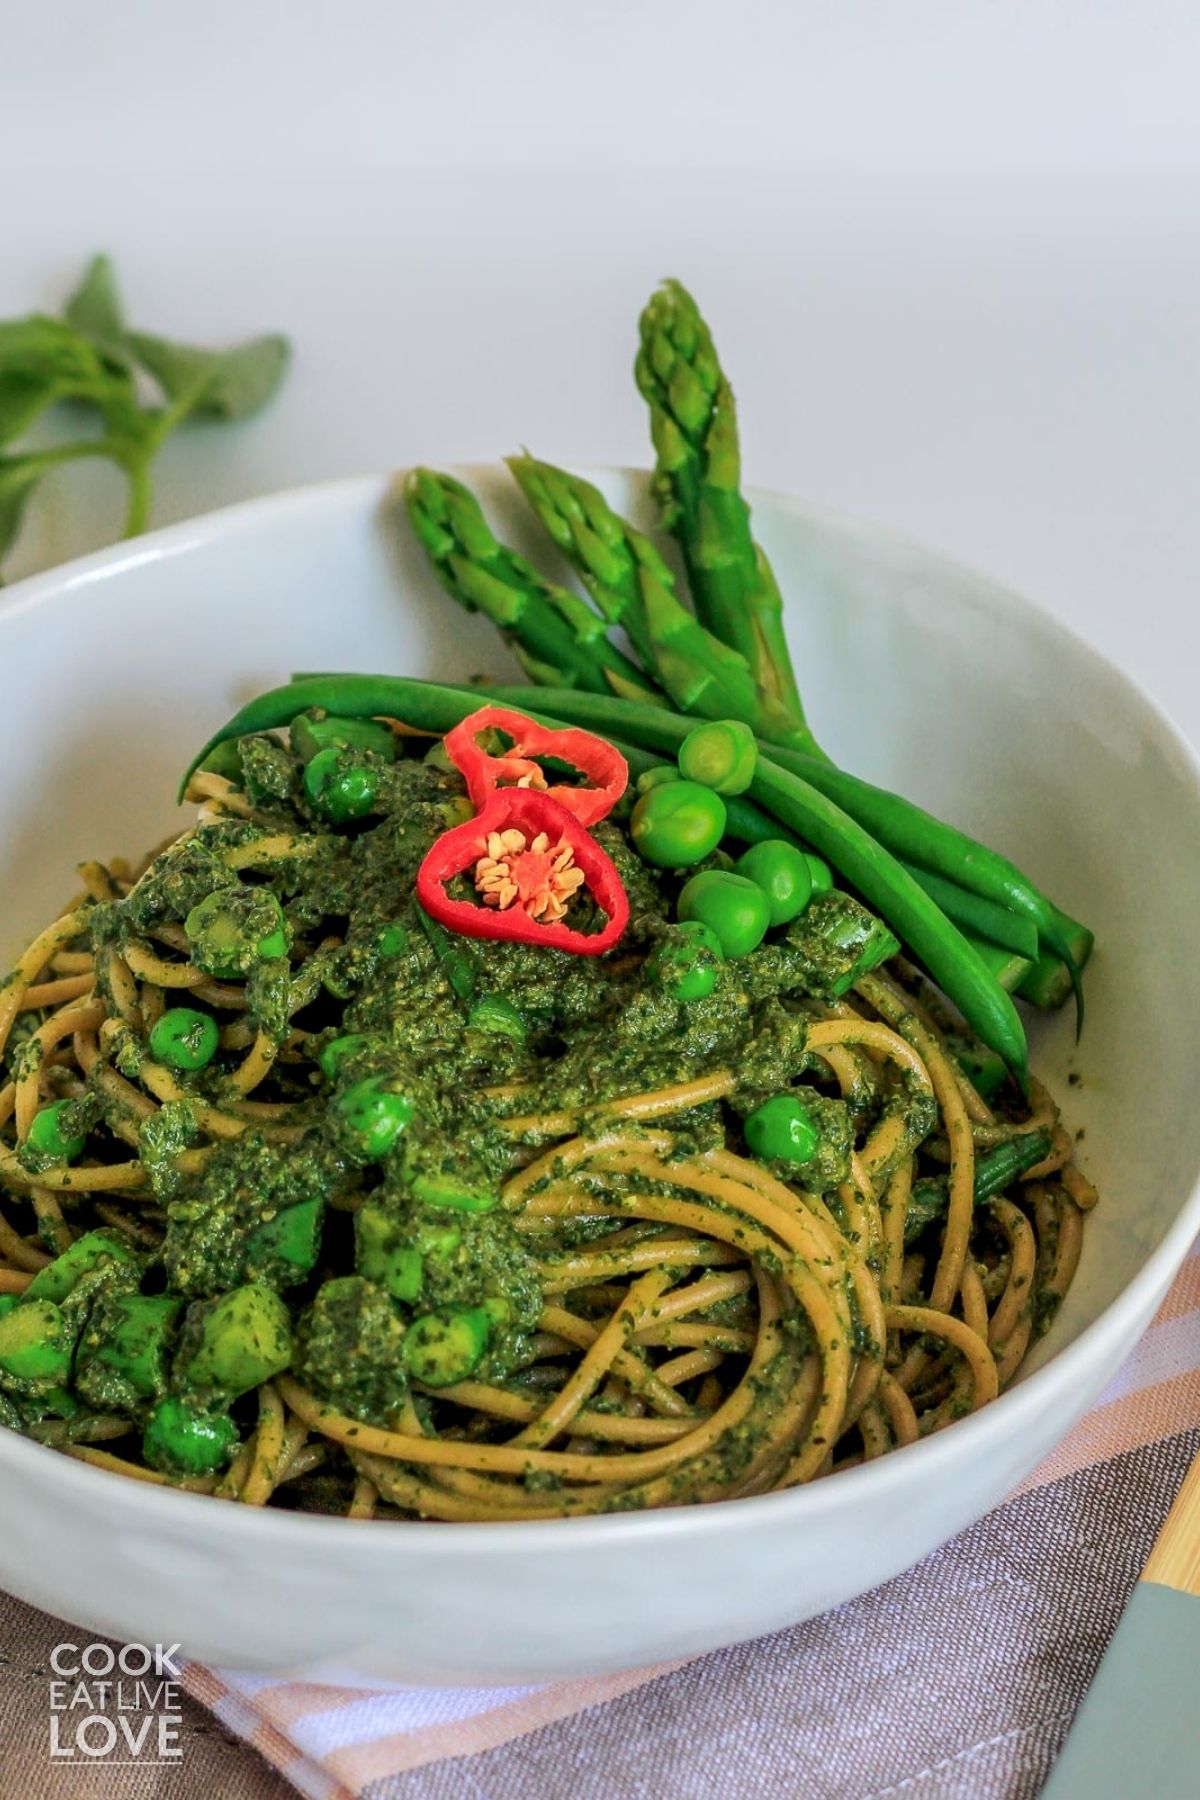 Green spaghetti in a bowl with peas, asparagus, and red chilies on top.